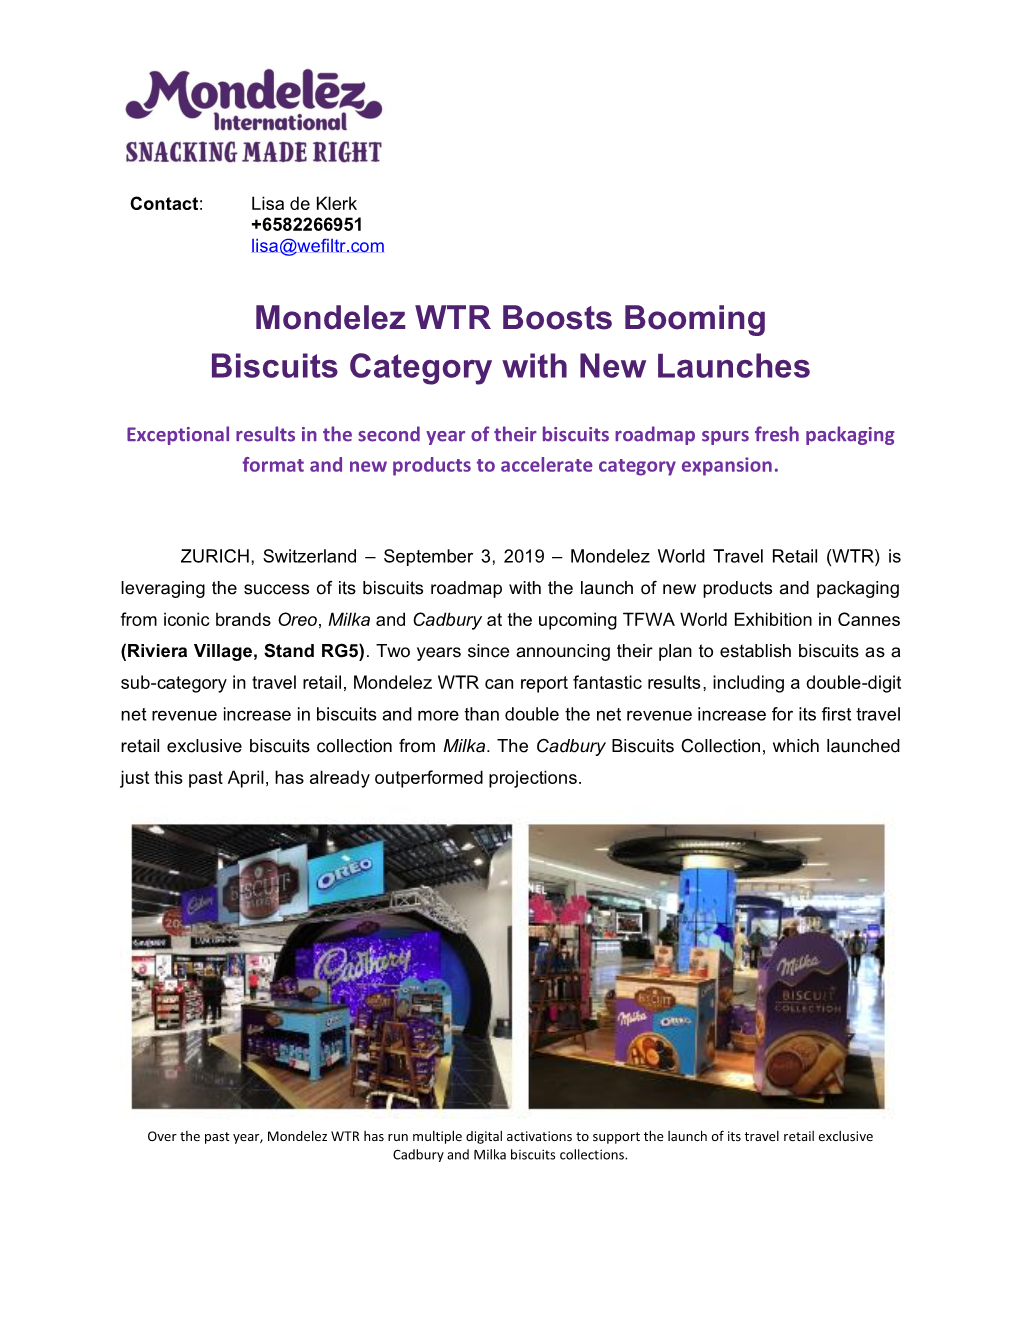 Mondelez WTR Boosts Booming Biscuits Category with New Launches